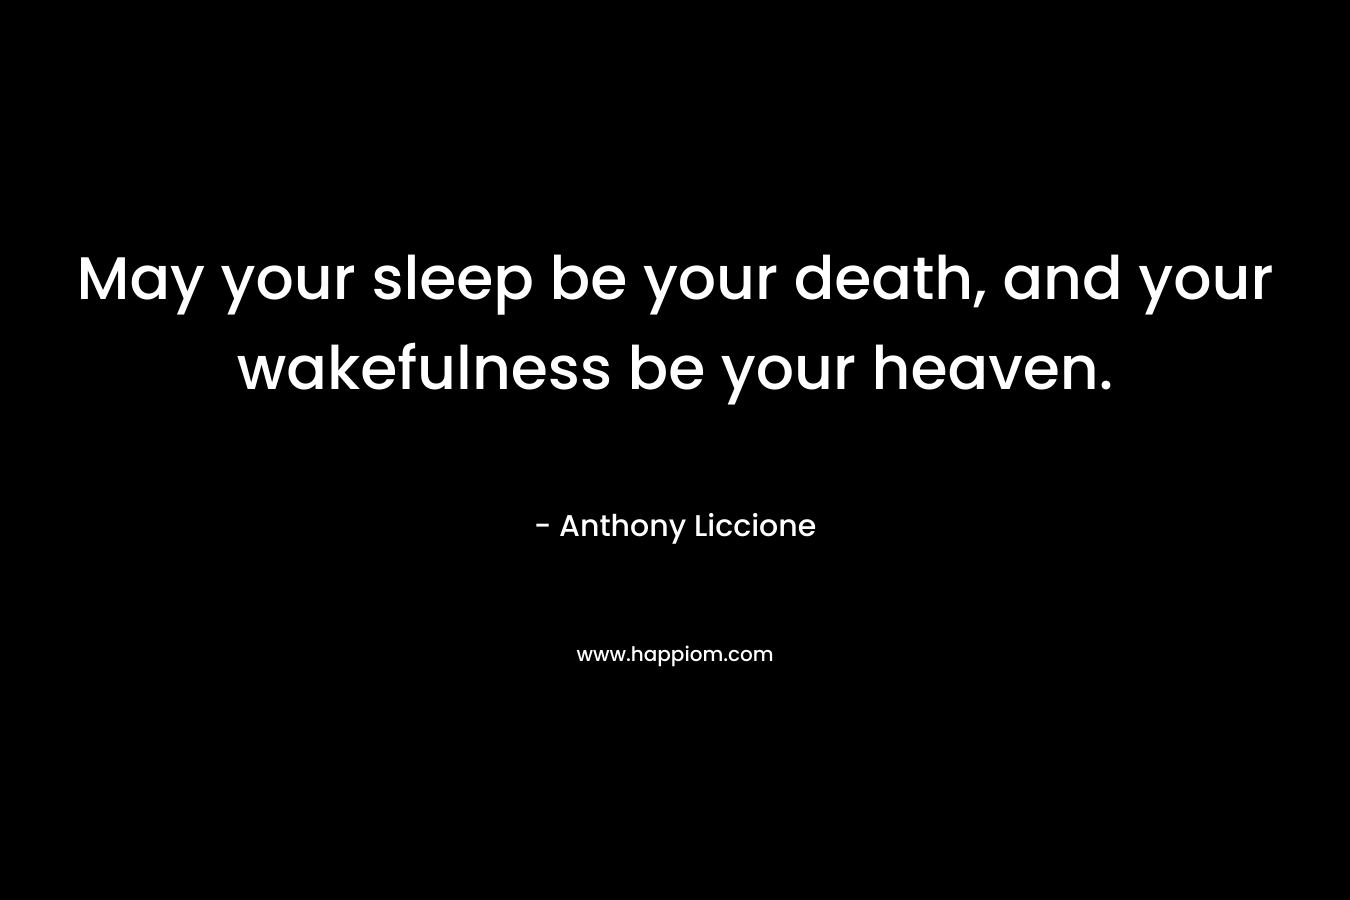 May your sleep be your death, and your wakefulness be your heaven.